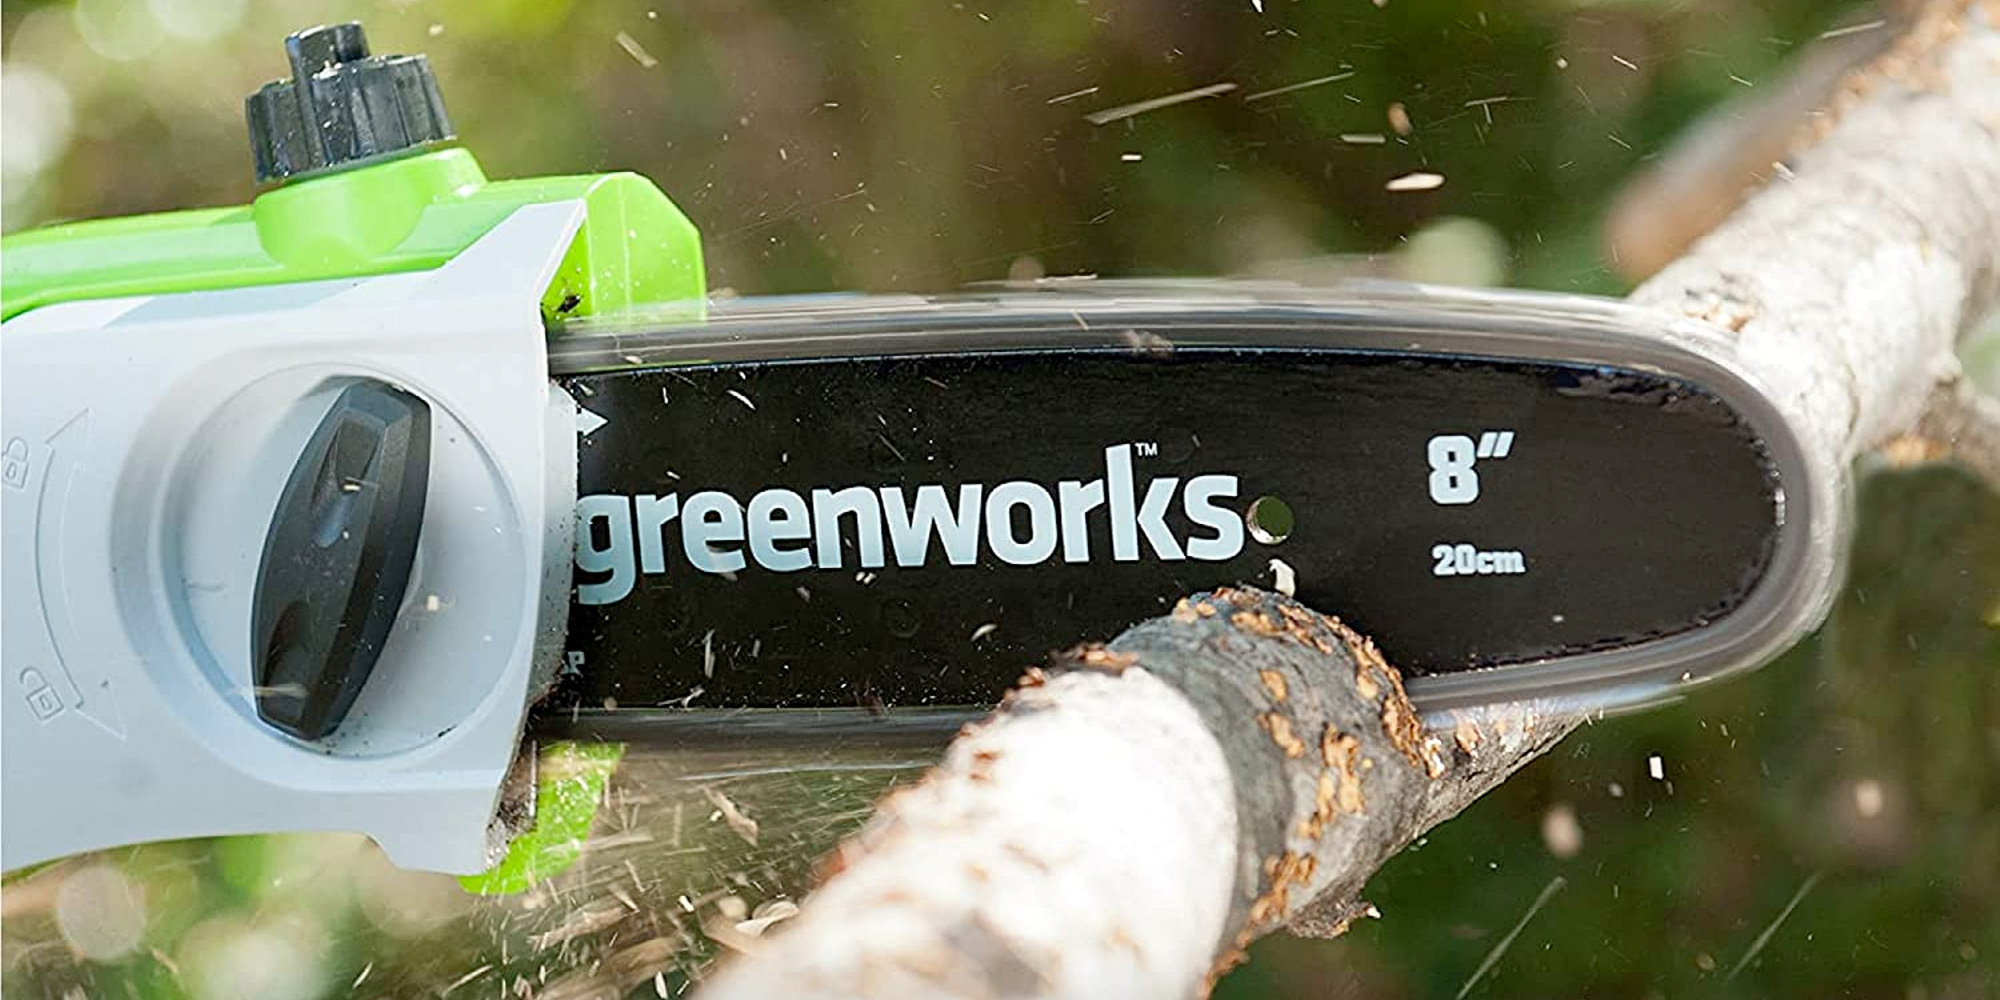 Cordless hedge trimmer hits low of $70, more